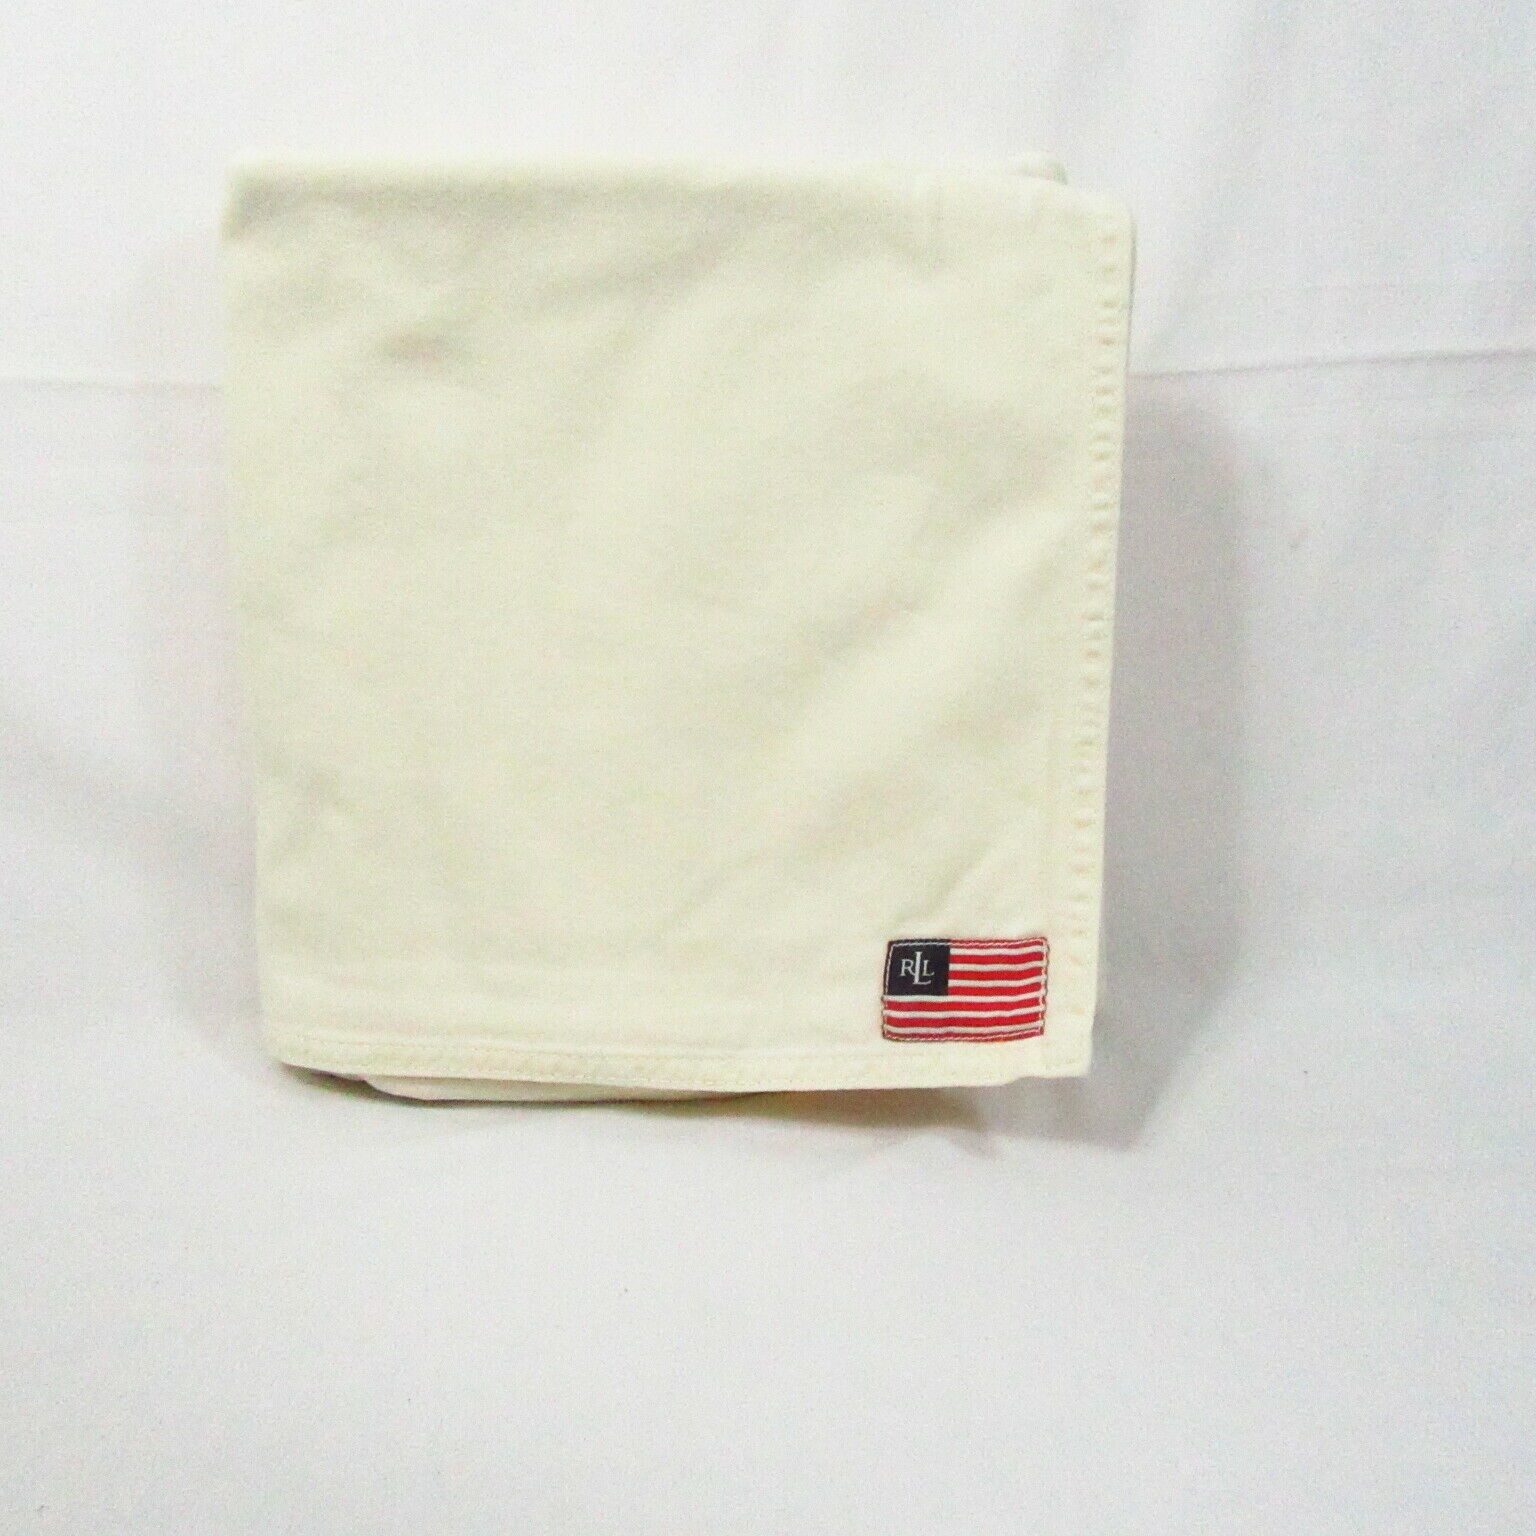 Primary image for Ralph Lauren Chino LRL Flag Pale Yellow 60x100 Oblong Tablecloth